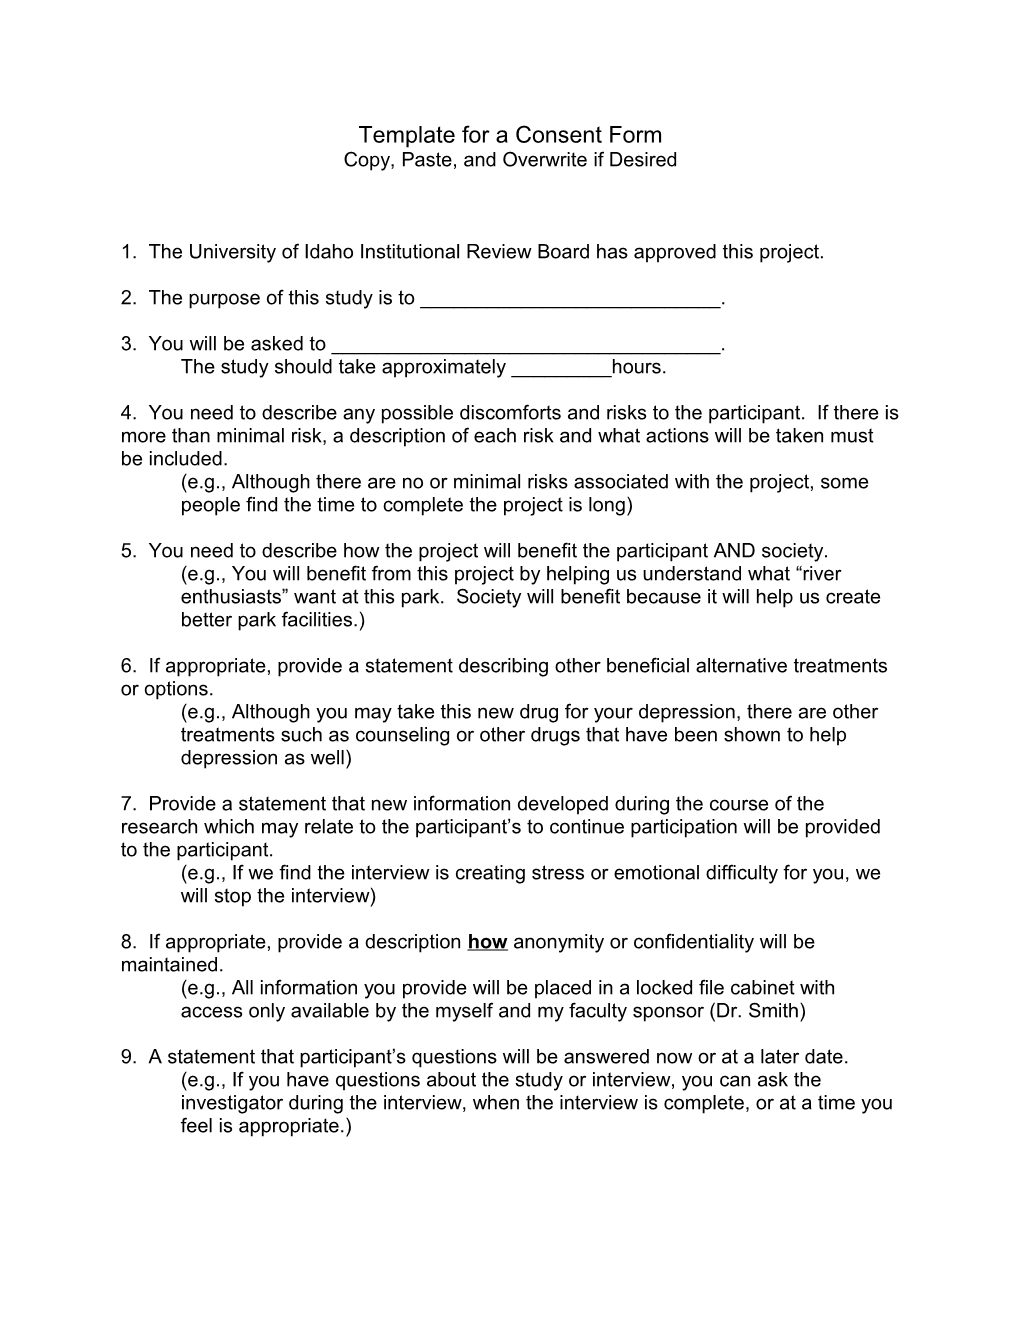 Template for a Consent Form